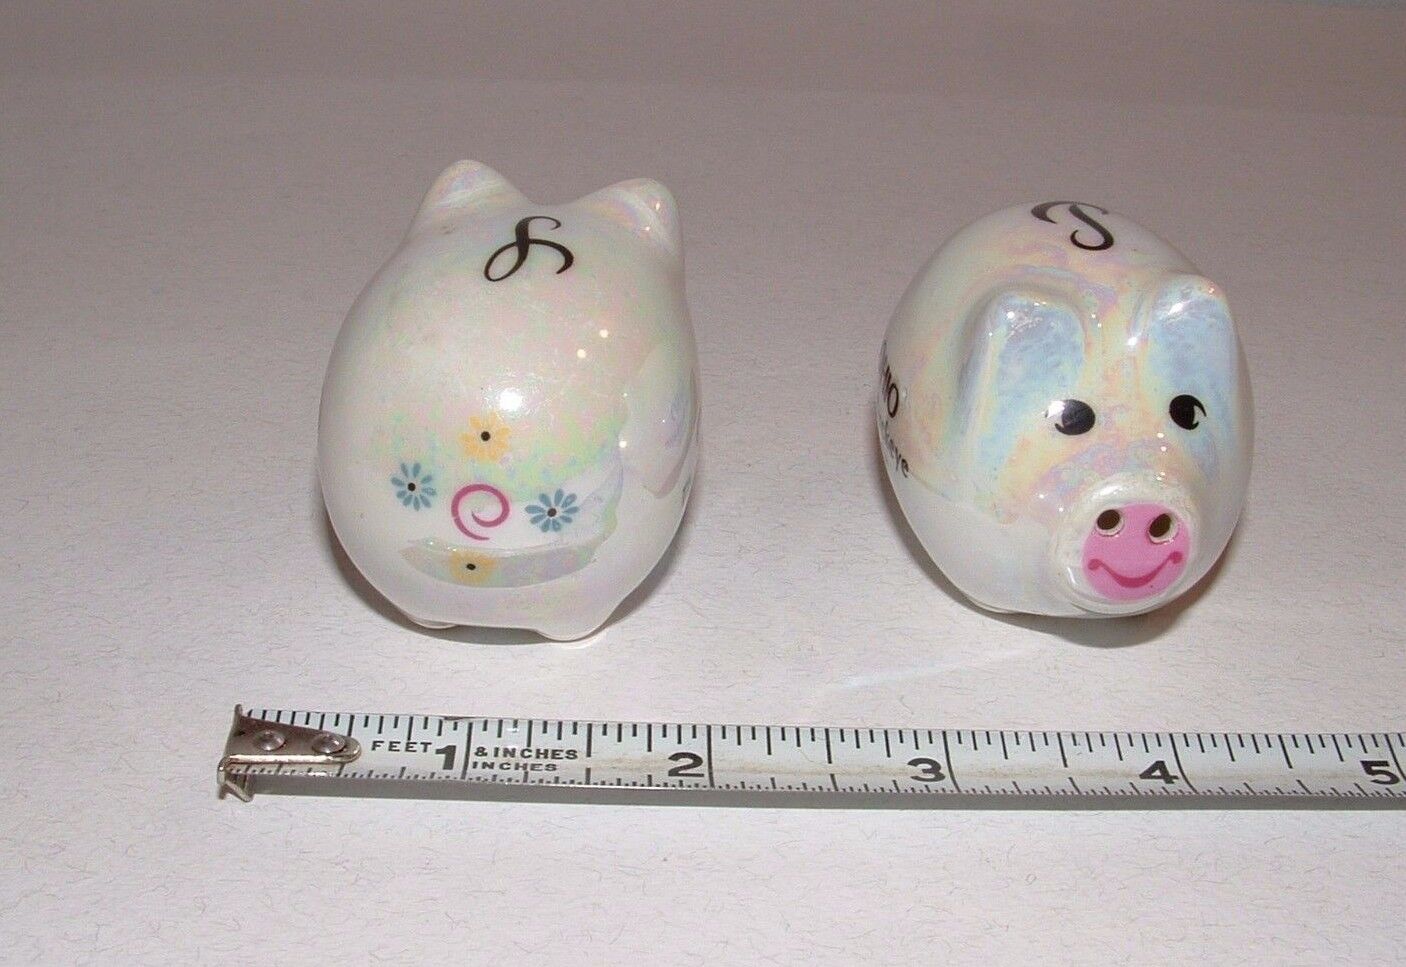 Pig Salt & Pepper Shakers, Ohio / Buckeye / Carnation, Age Unknown, pre-owned